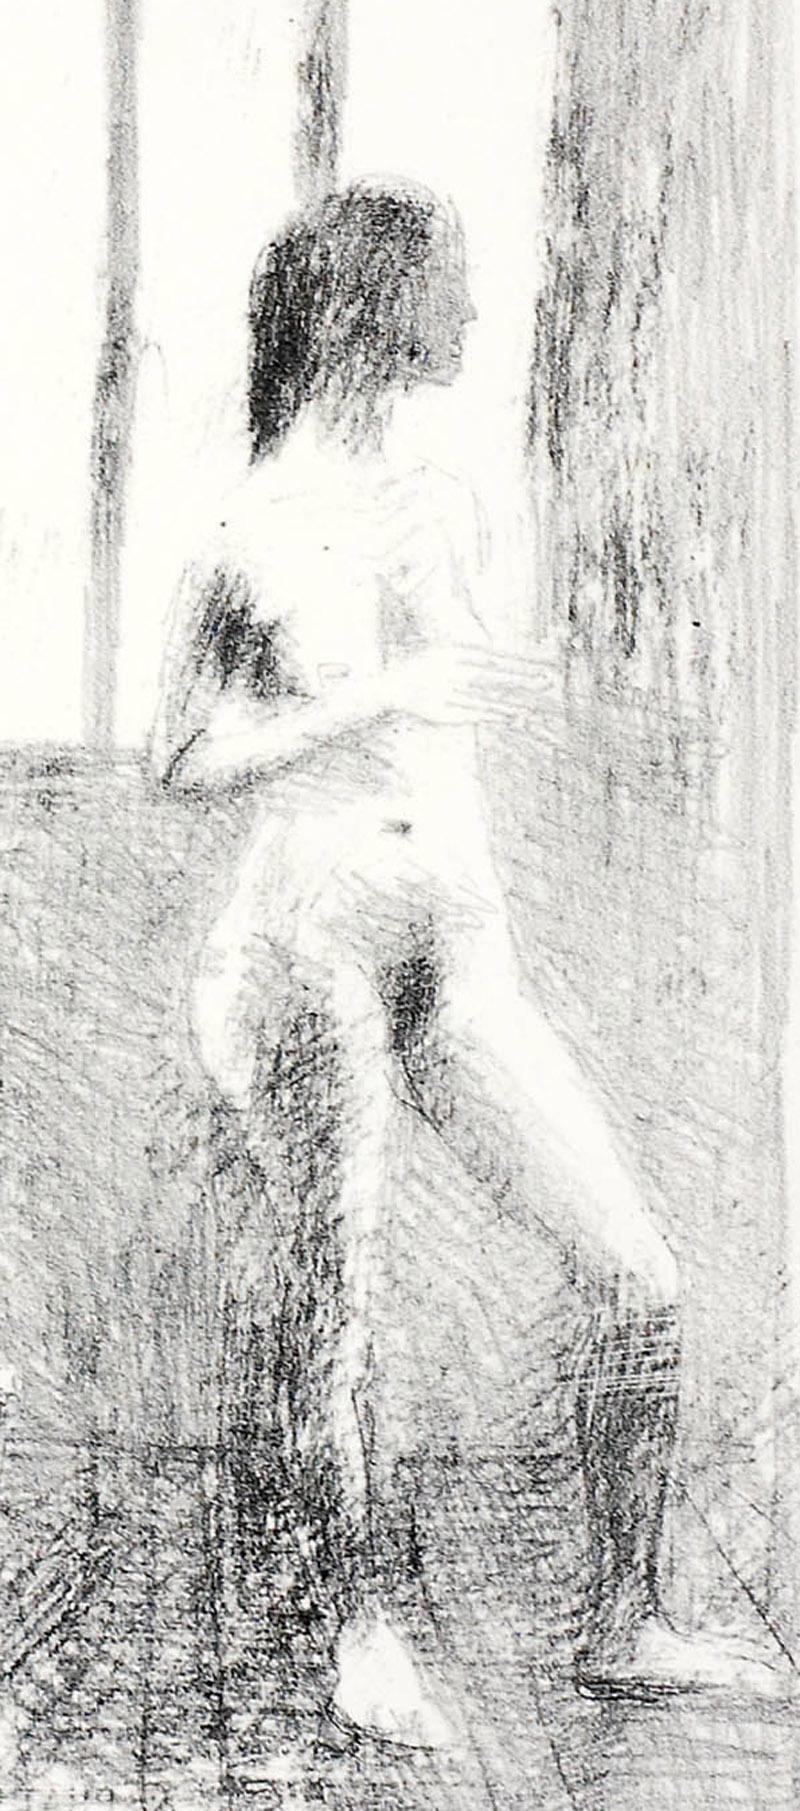 Self Portrait (With Model)
Lithograph, 1959-1960
Signed and numbered in pencil (see photos)
Edition: 50 (30/50)
Commissioned by ACA Gallery, NYC
Depicts the artist in his studio at Second Avenue and Third Street, NYC
Reference: Cole 81
Condition: